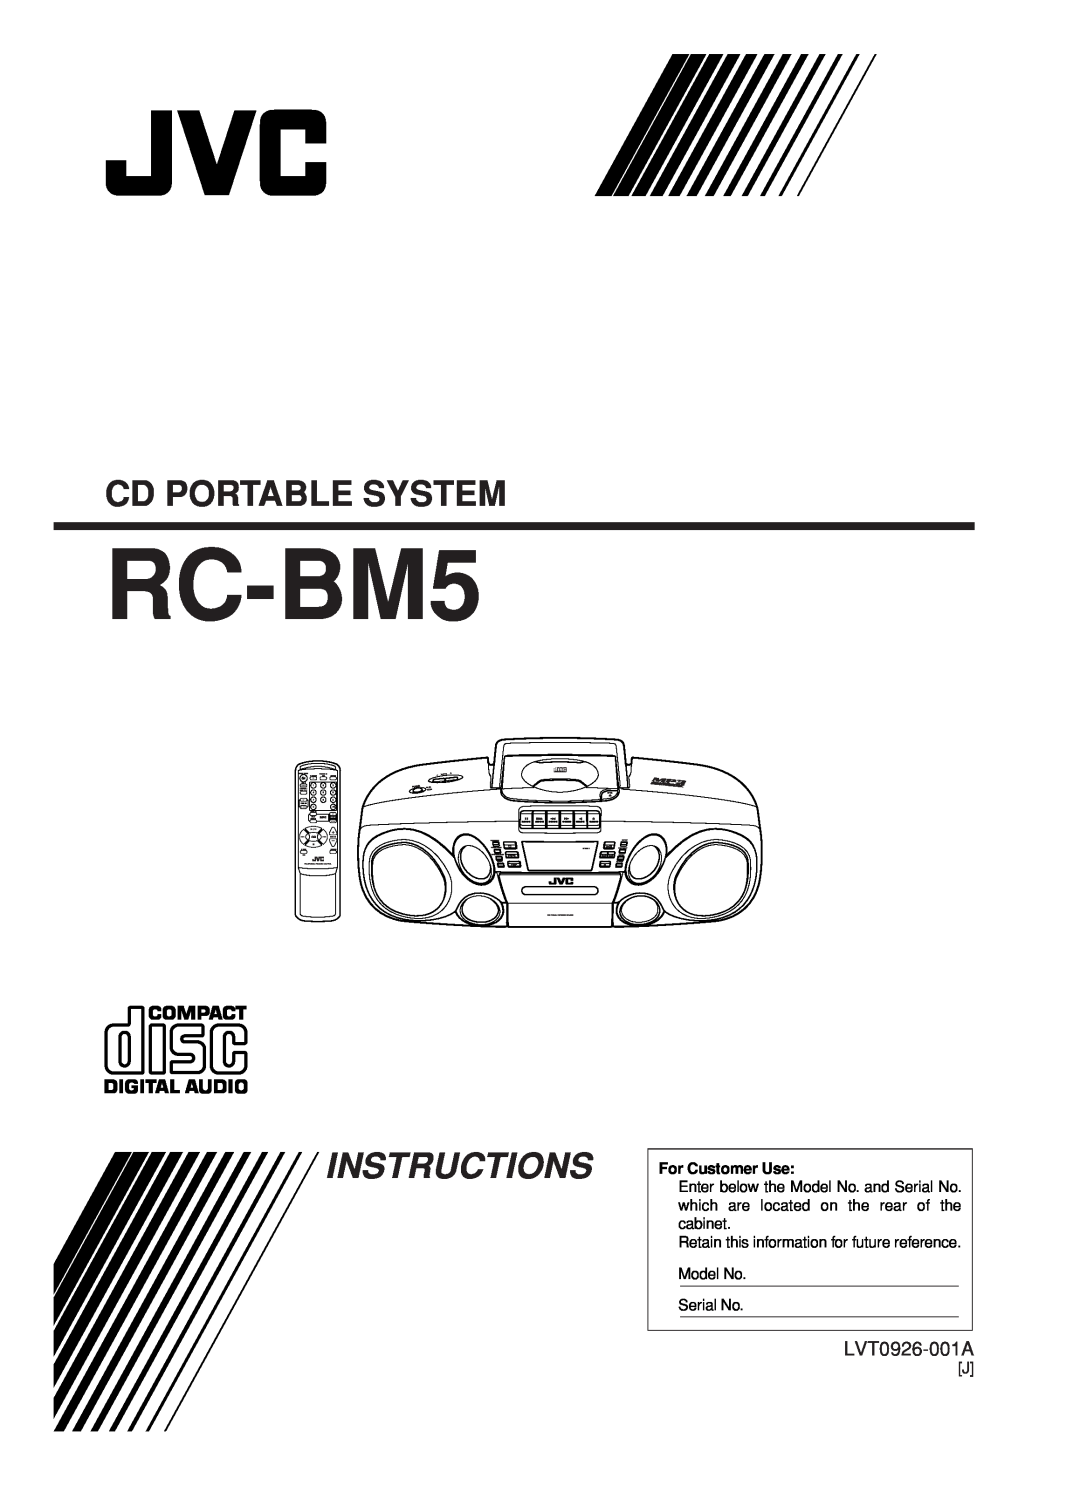 JVC RC-BM5 manual Cd Portable System, Instructions, LVT0926-001A, For Customer Use, Model No Serial No, Tuner, Tape 